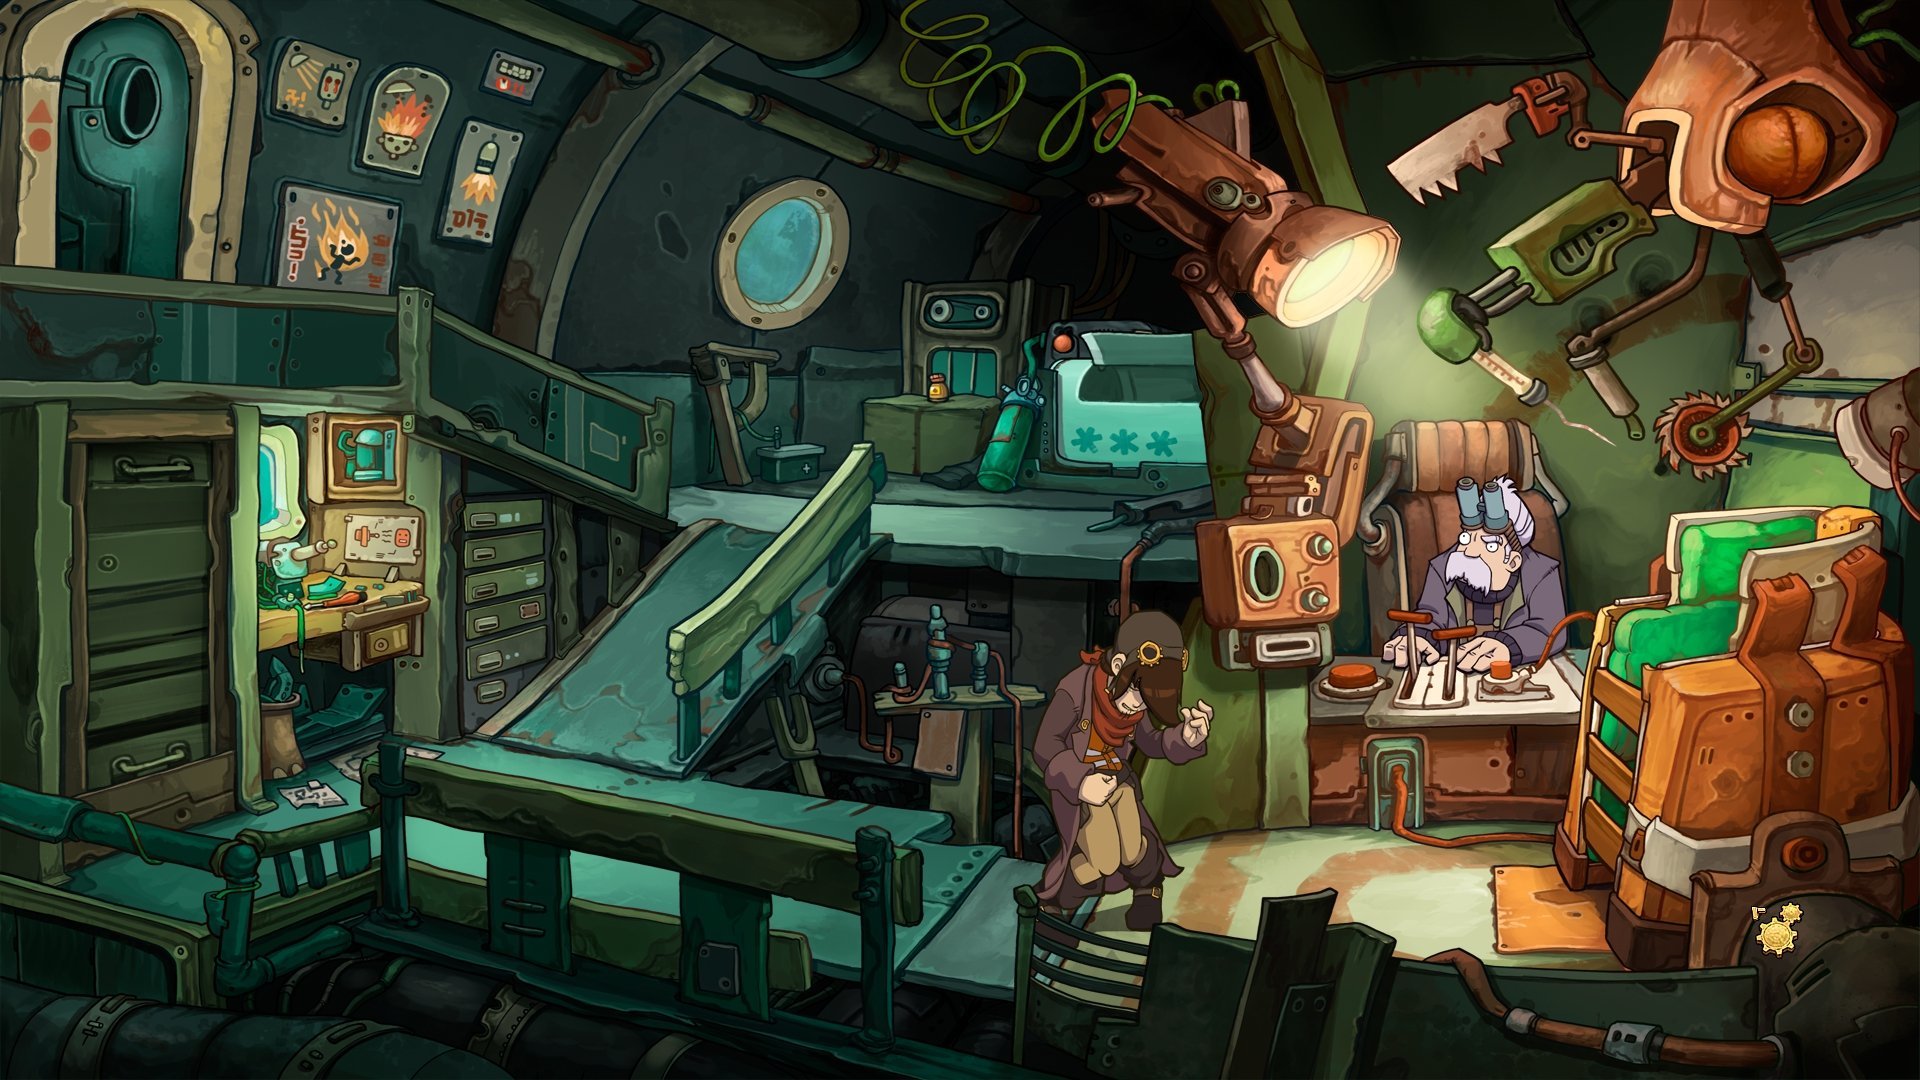 Chaos on Deponia (2012) - Game details | Adventure Gamers